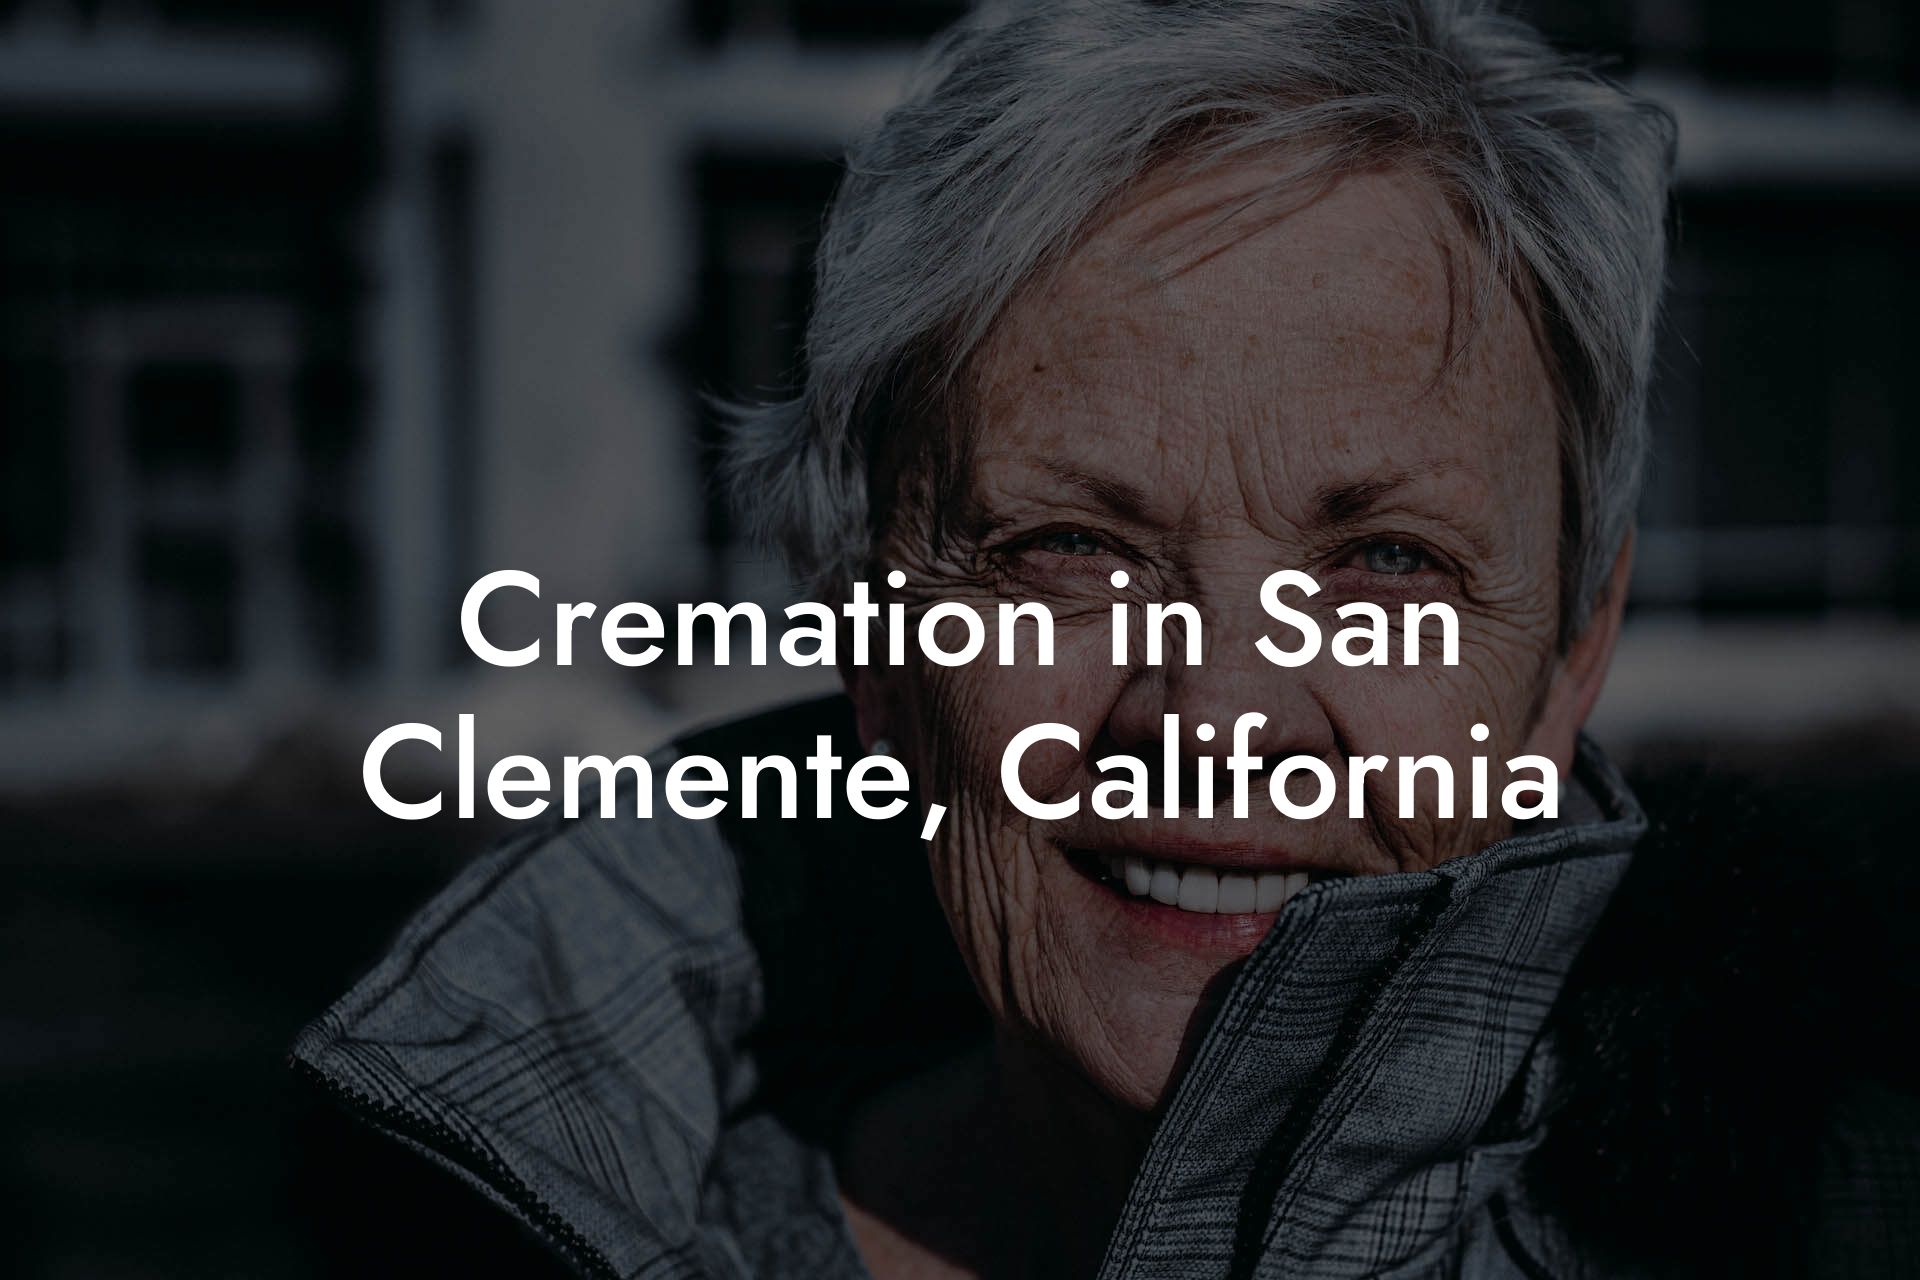 Cremation in San Clemente, California